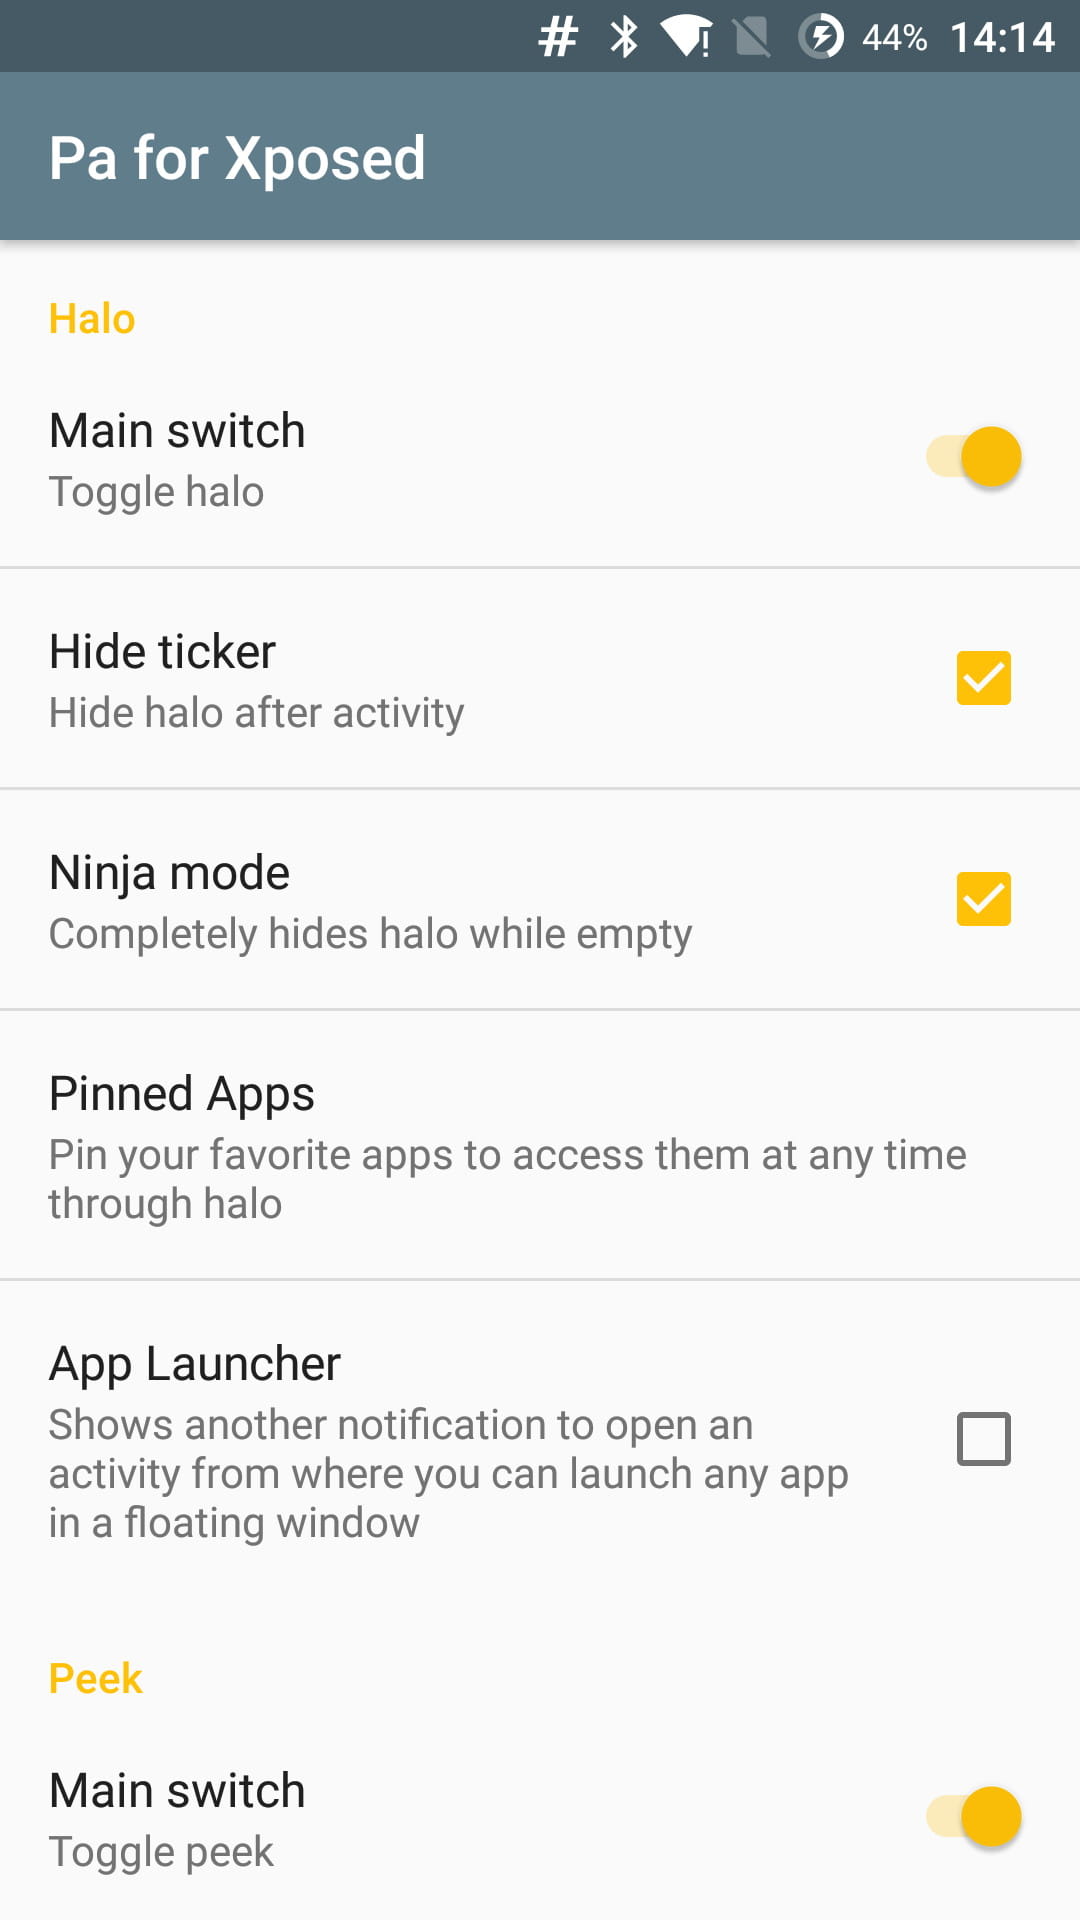 Pa for Xposed v2.0截图